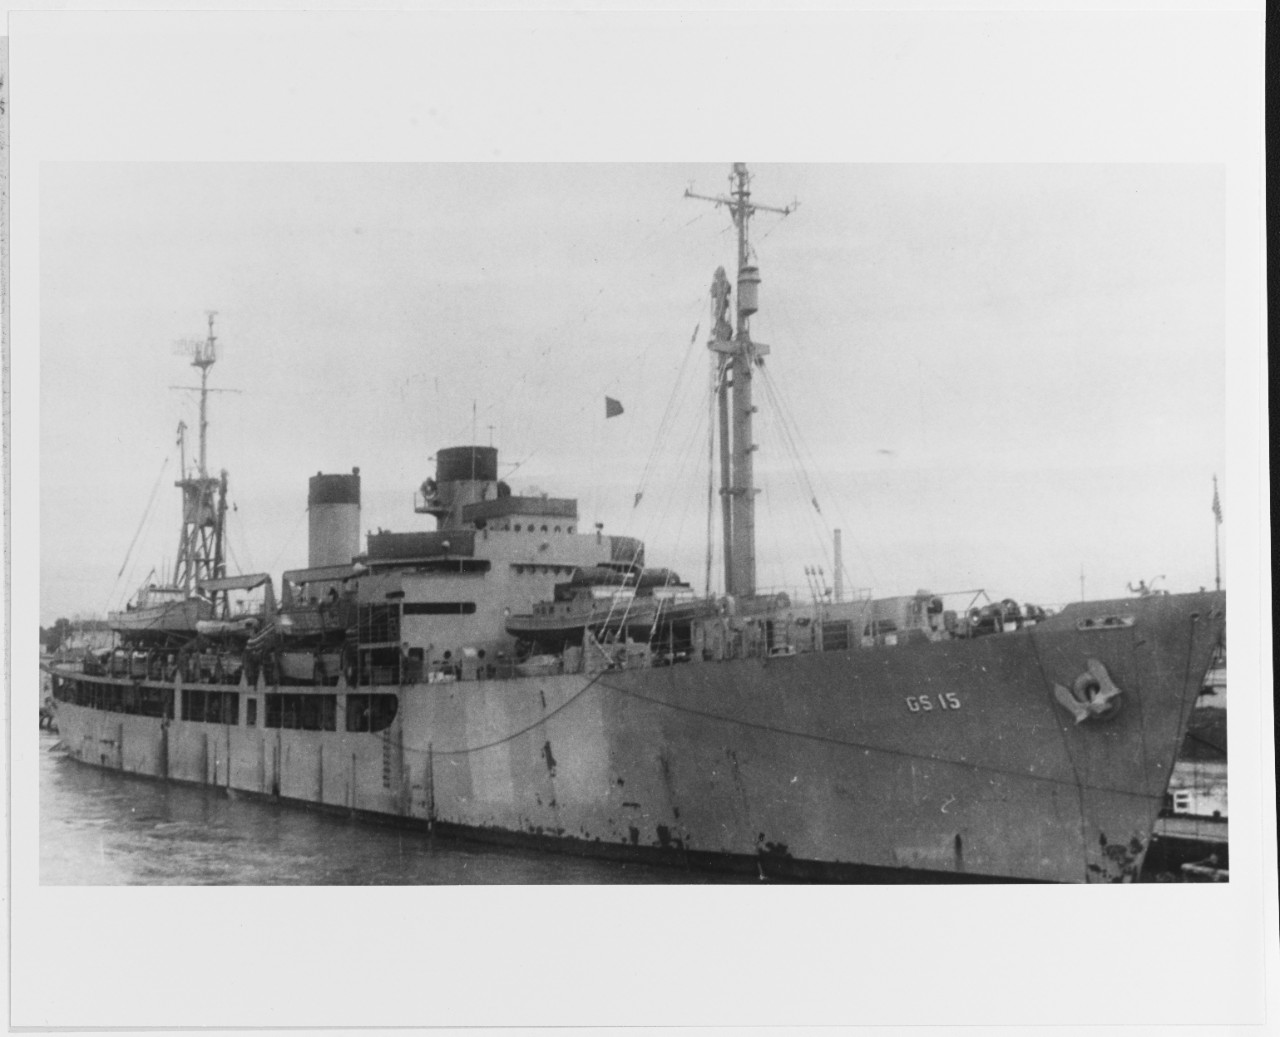 USS TANNER (AGS-15)